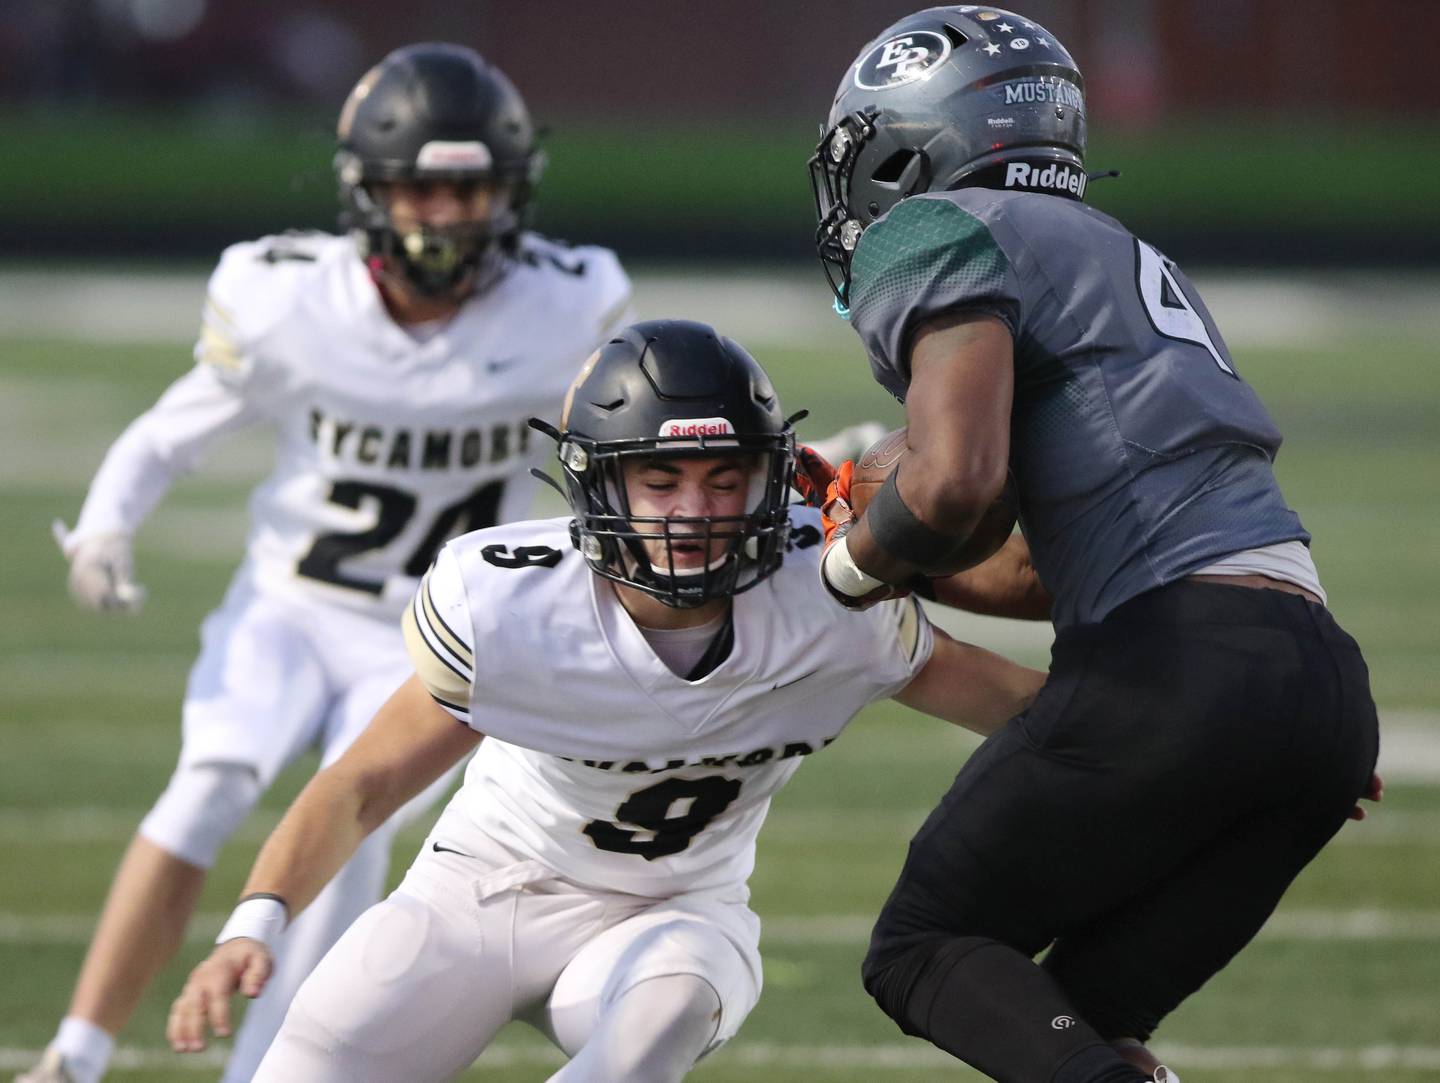 Sycamore's Dawson Alexander tackles Evergreen Park's Michael Torres Saturday, Oct. 30, 2021, during their IHSA Class 5A playoff opener at Evergreen Park High School.